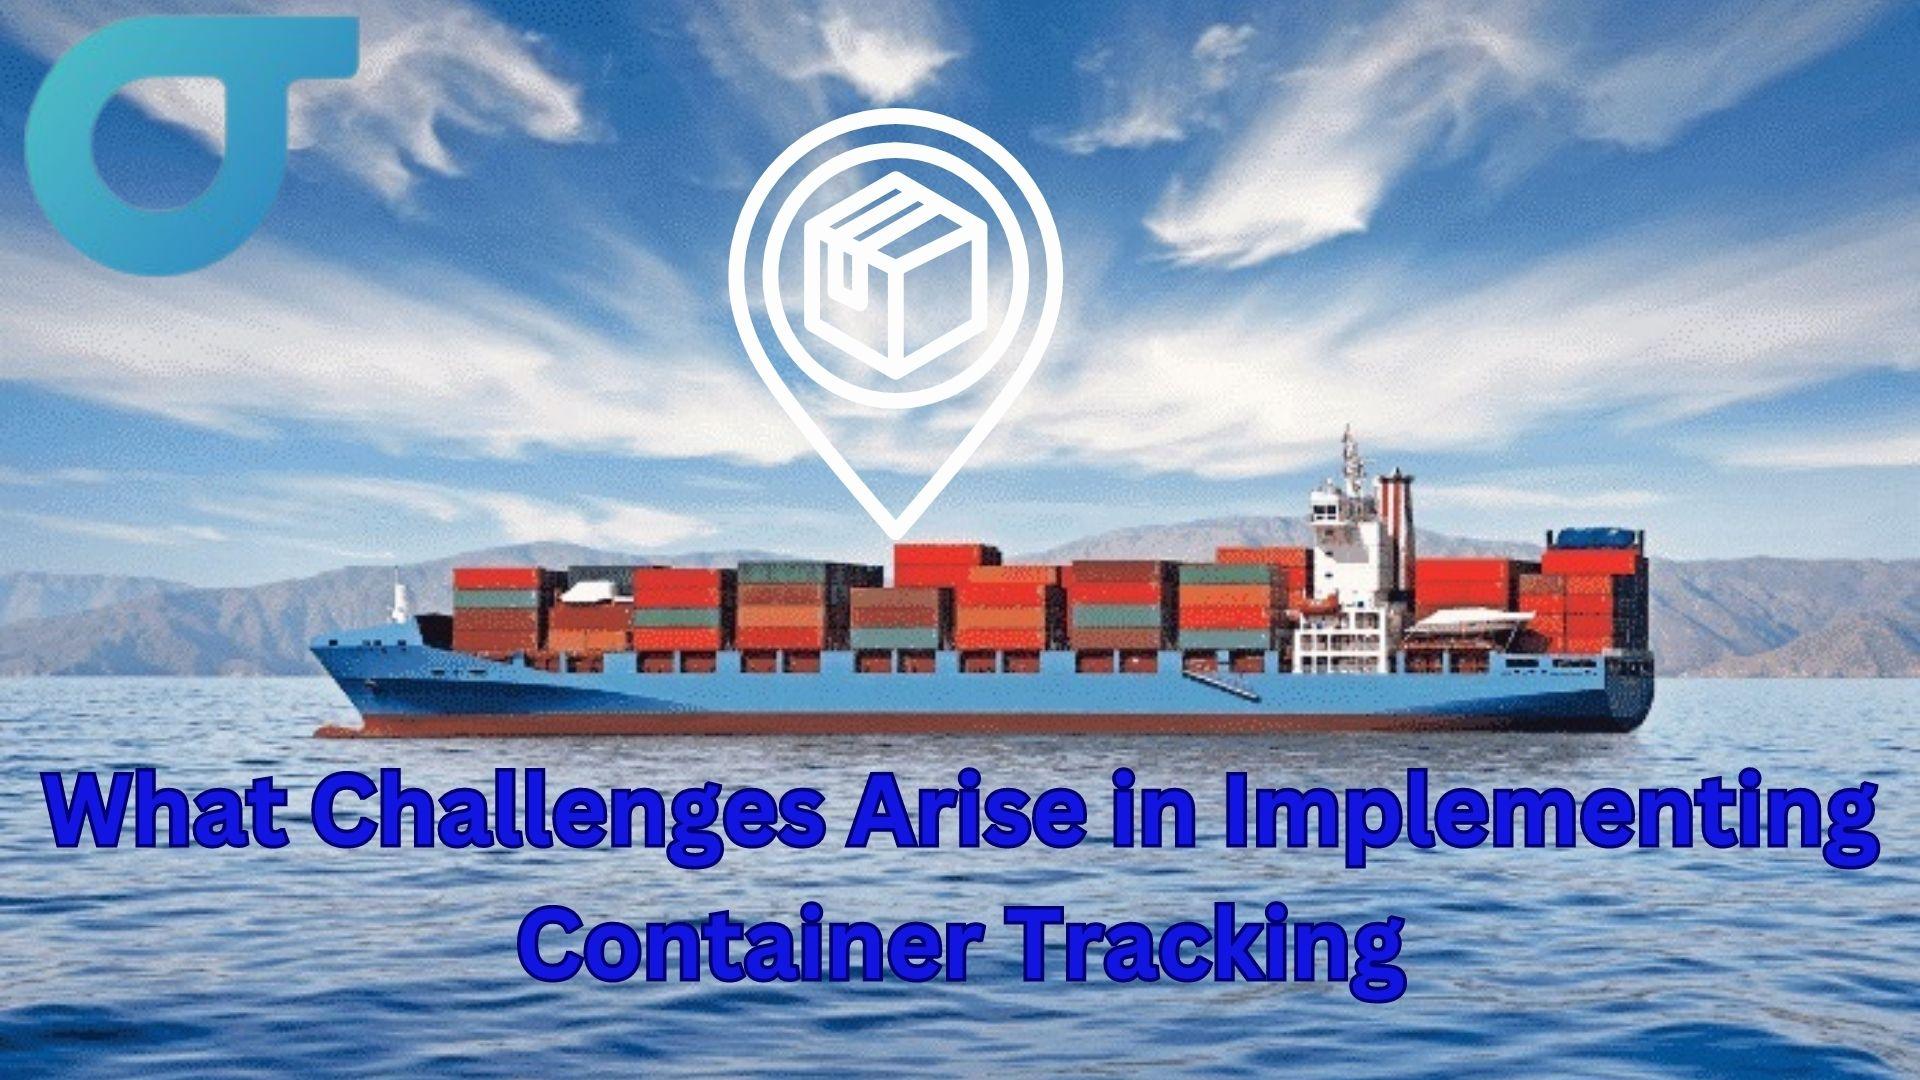 What Challenges Arise in Implementing Container Tracking?